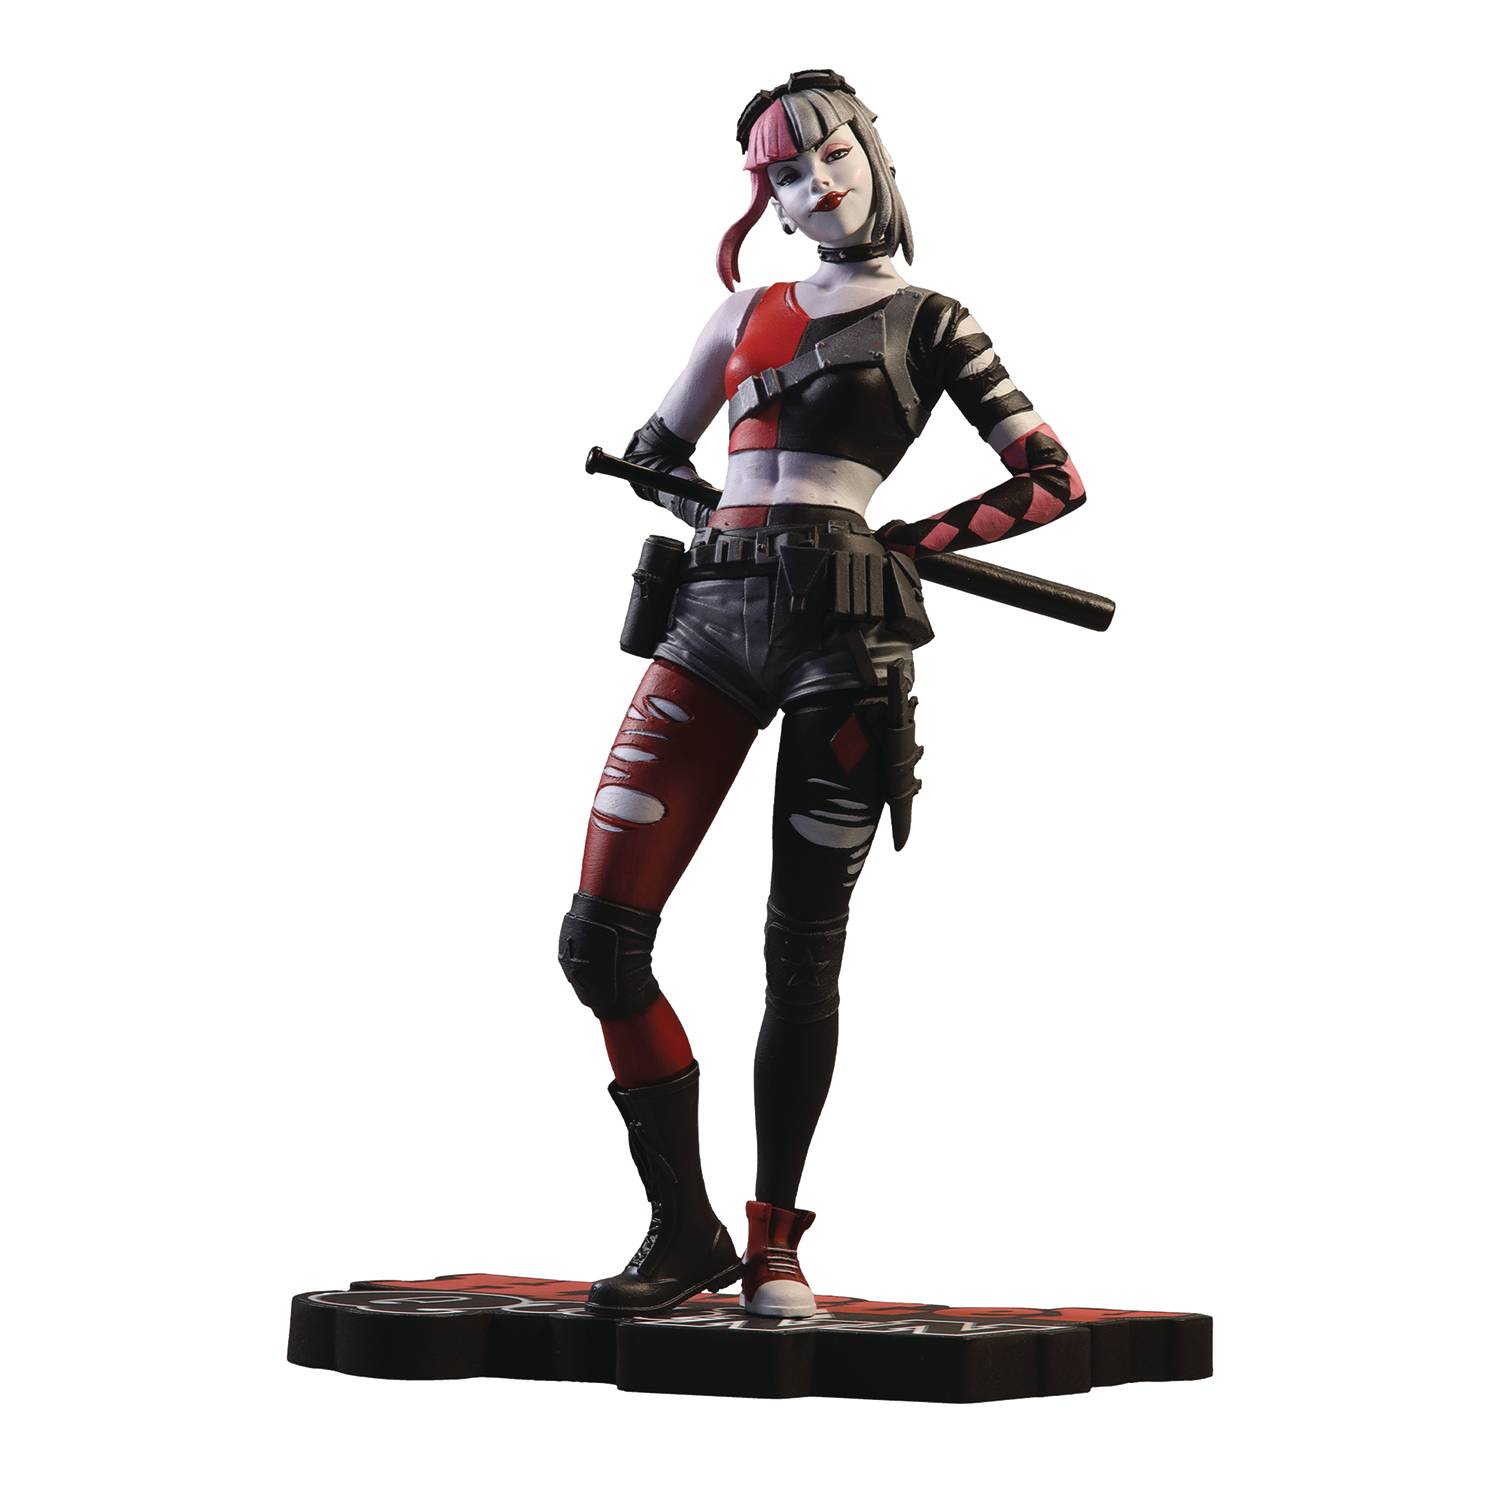 DC Direct Harley Black & White Harley by Simone Di Meo Statue 